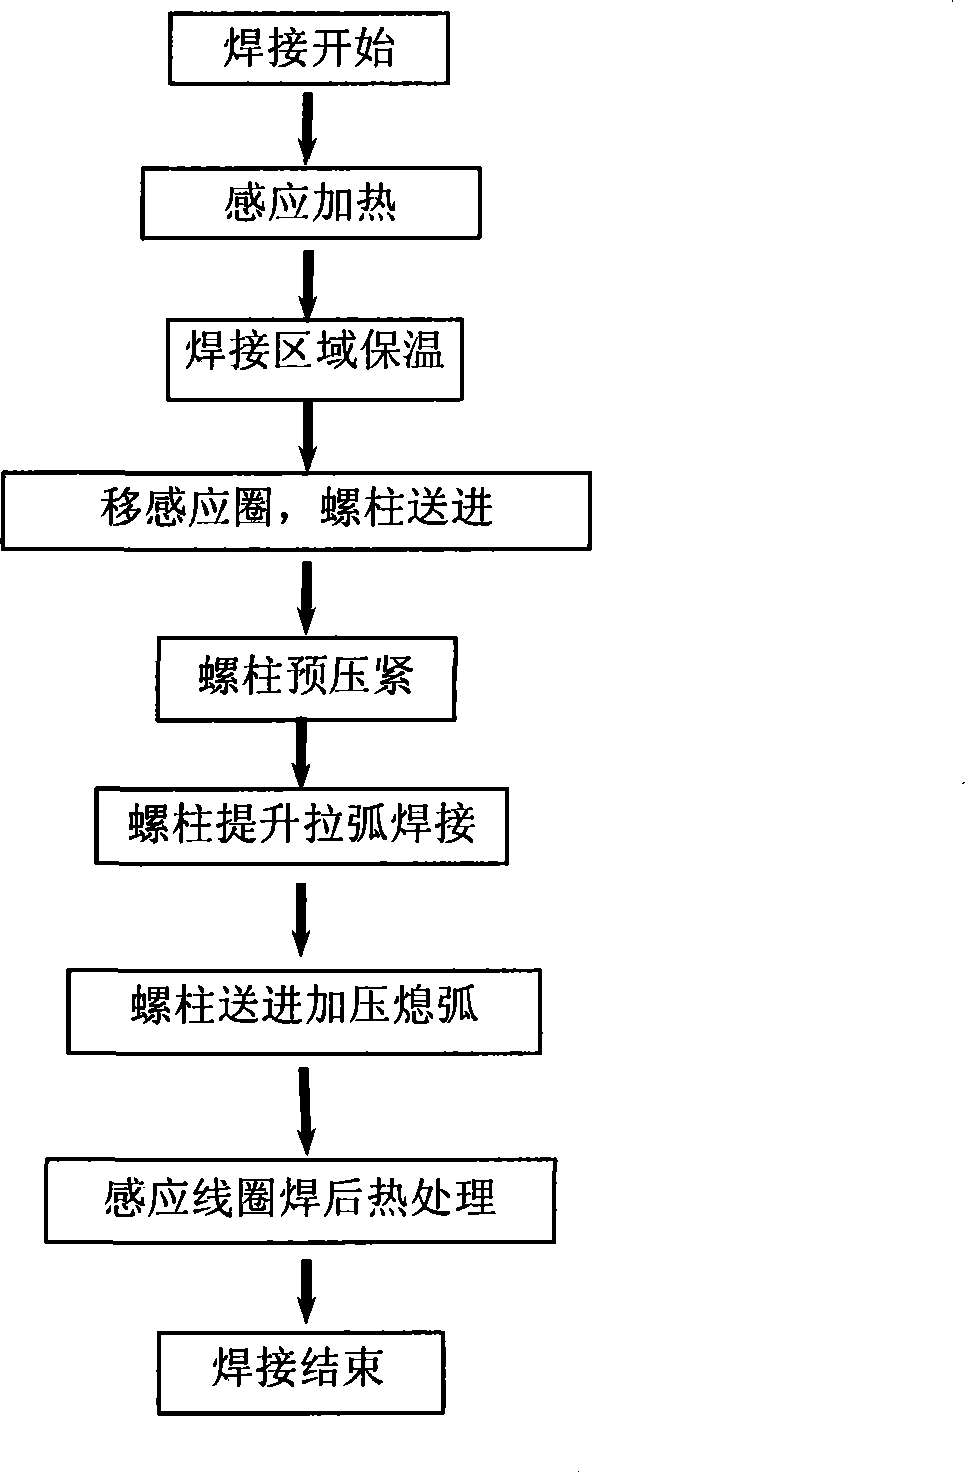 Induction and electrical arc composite heat source stud welding method